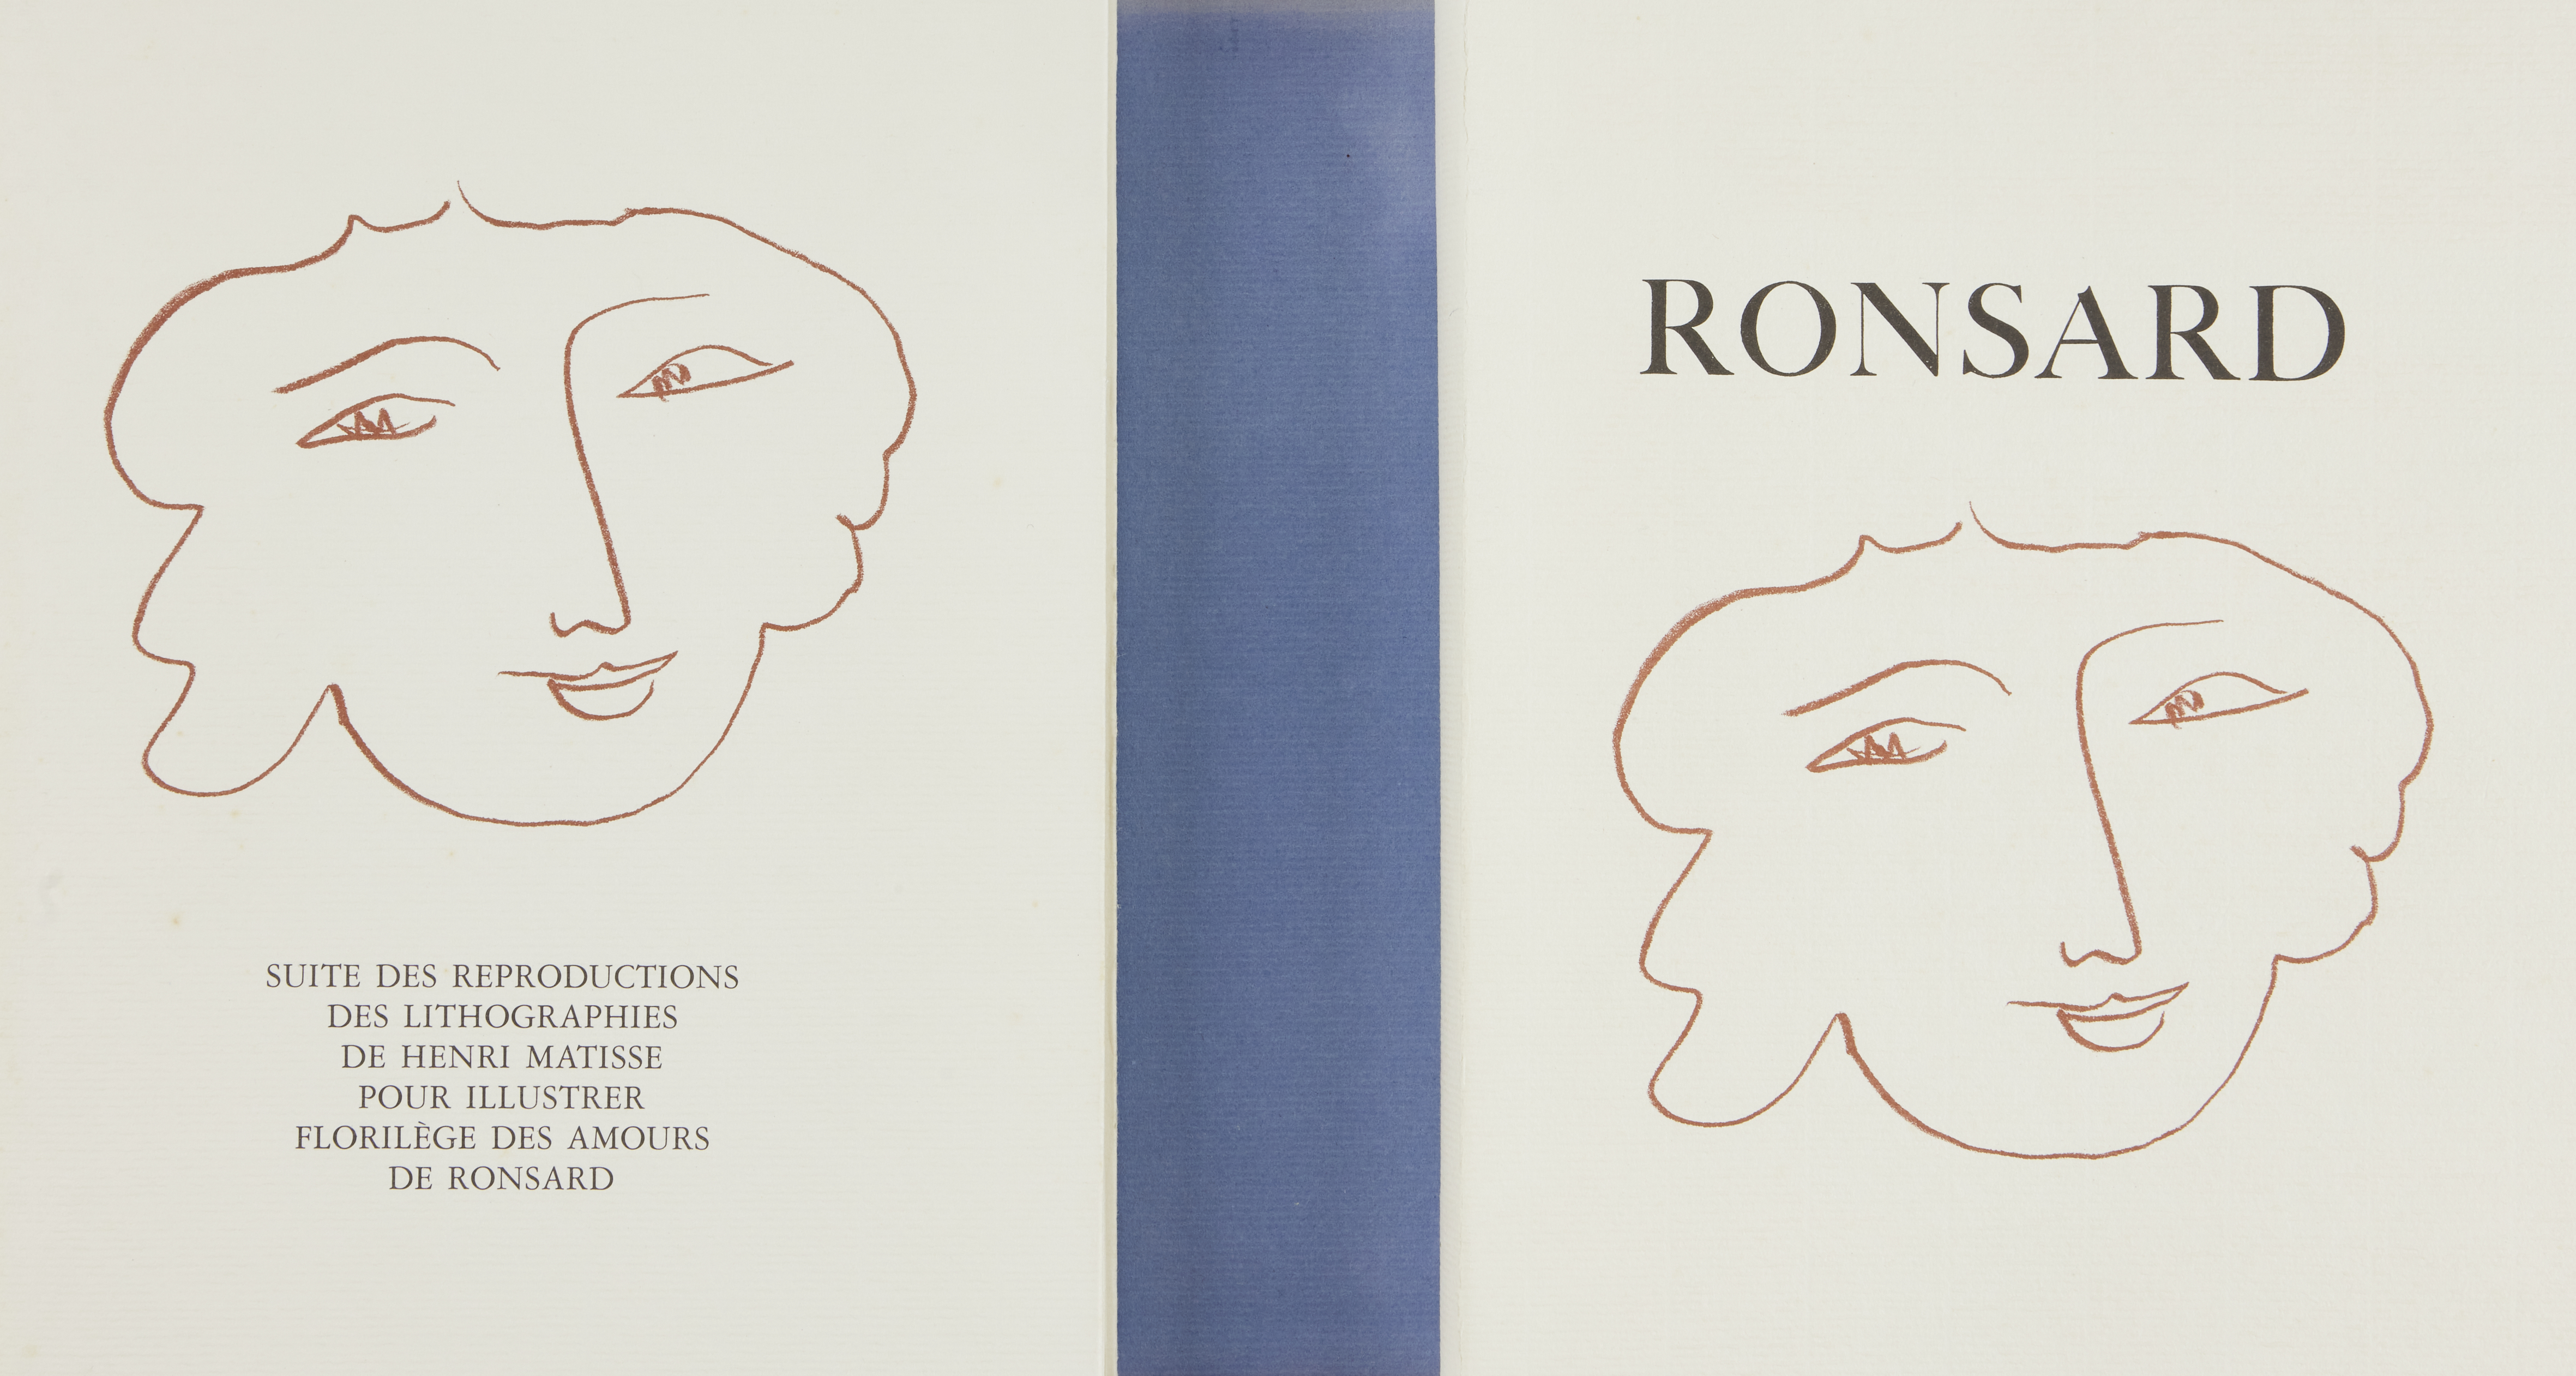 Henri Matisse, French 1869-1954, Florilege des Amours de Ronsard, 52 works from the suite of 126... - Image 3 of 4